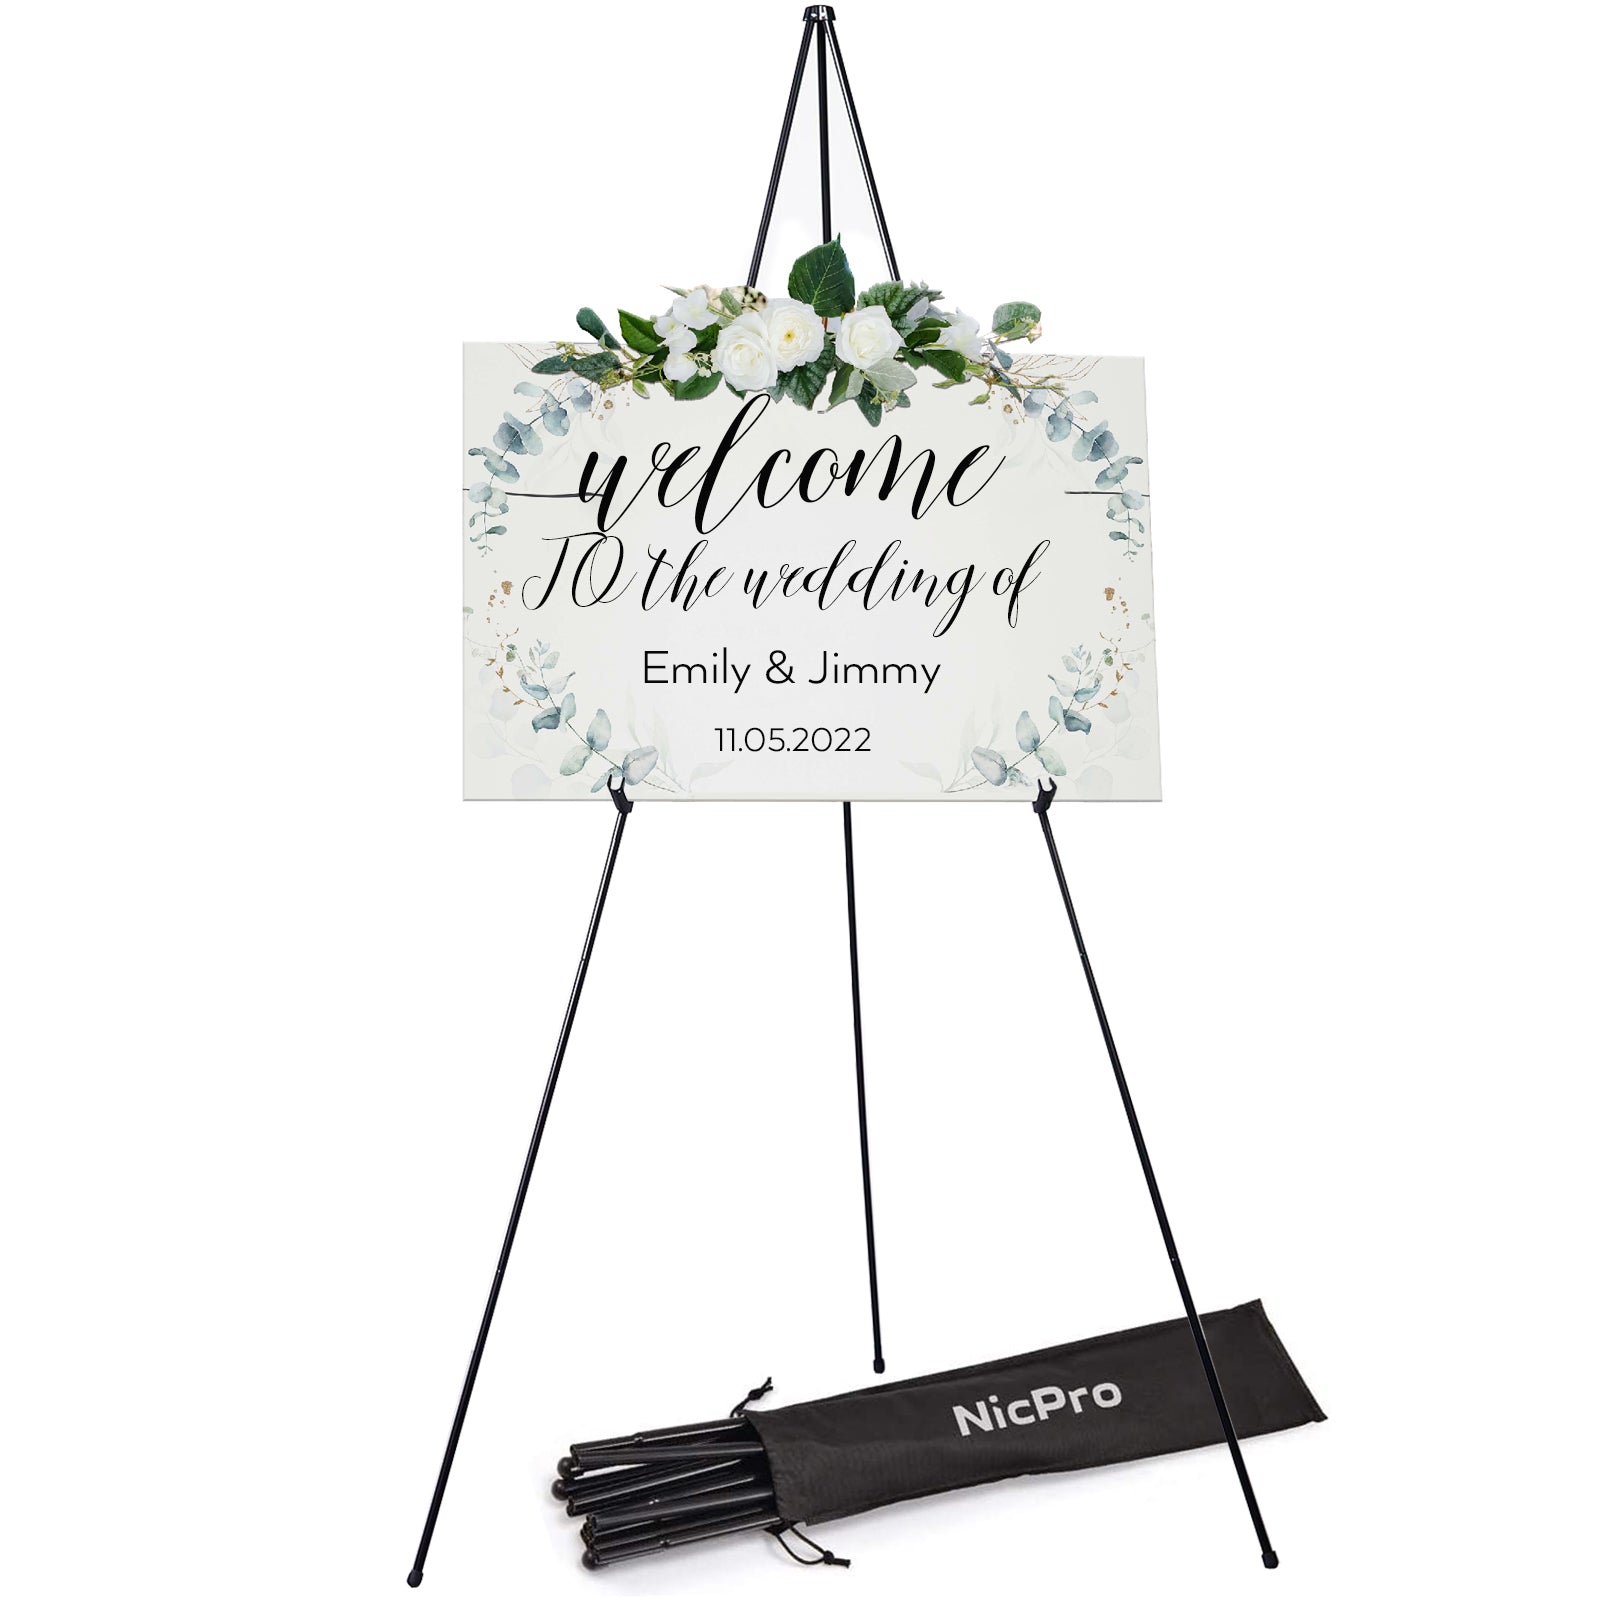 xinxintai Portable Artist Easel Stand 63 Inches - Black Picture Stand Painting Easel - Table Top Art Drawing Easels for Painting Canvas, Wedding Signs